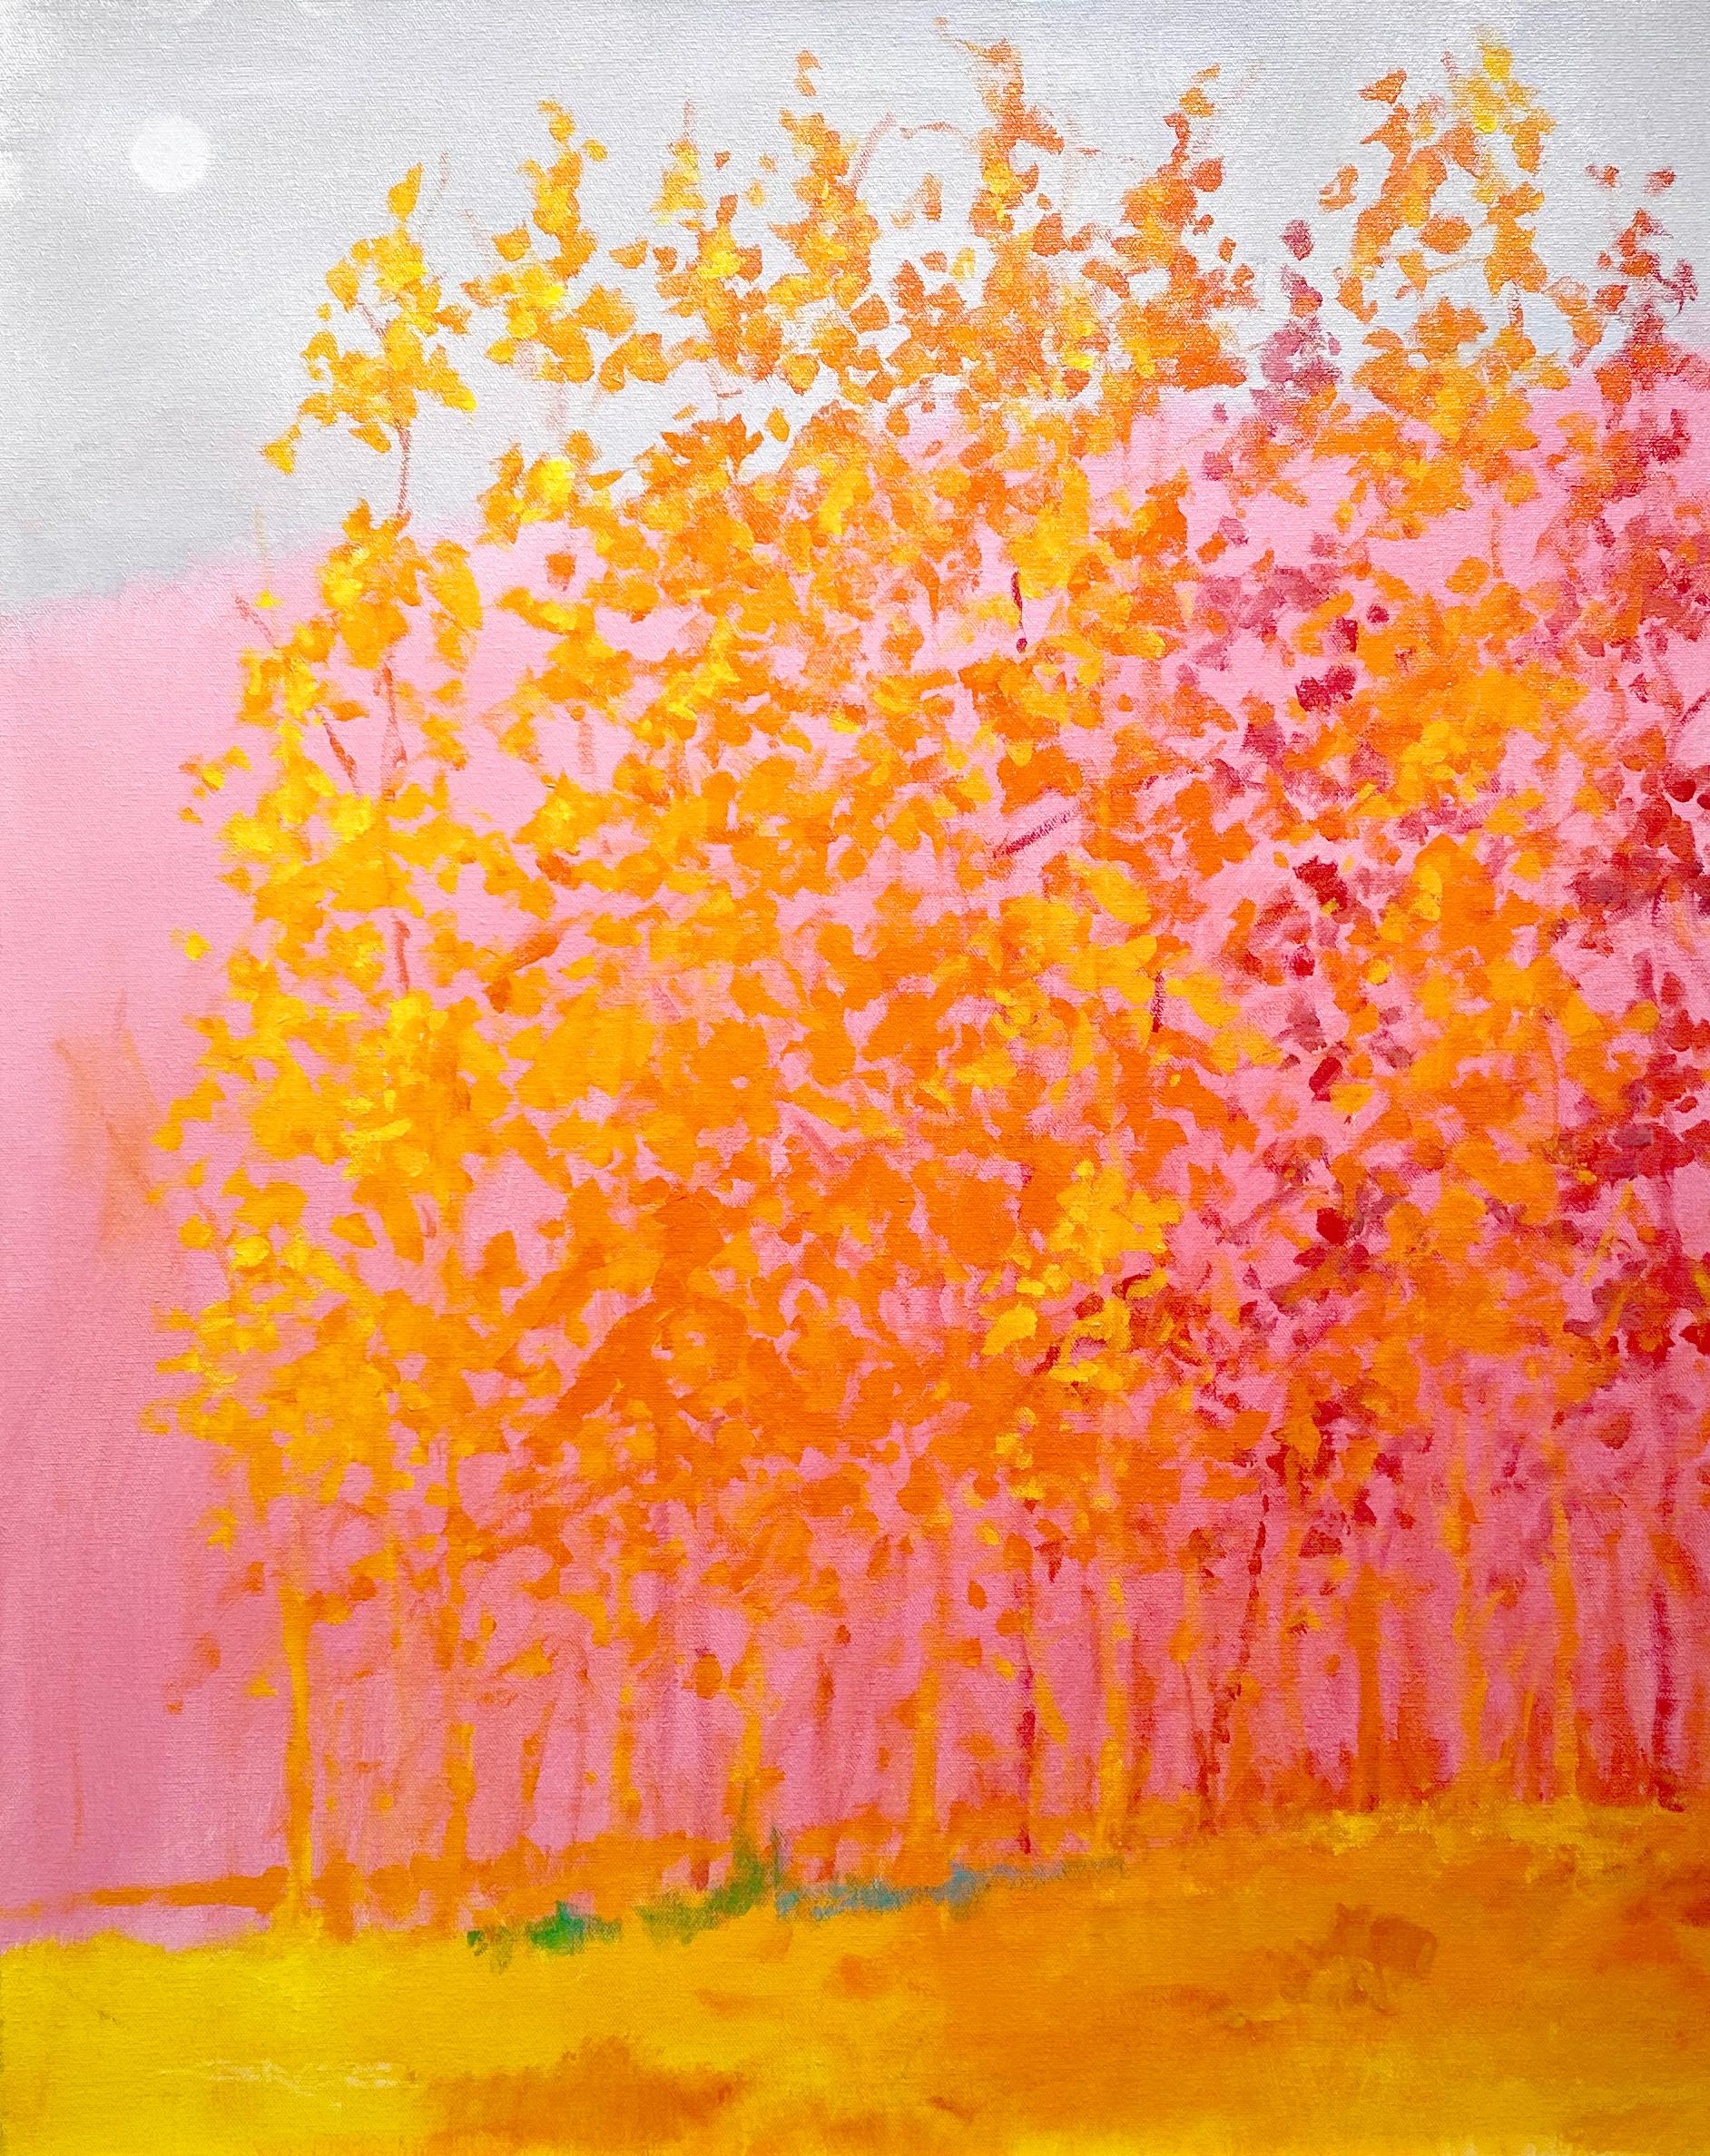 Charles Emery Ross Landscape Painting - C.E. Ross, "Pink Passion", Colorful Abstract Forest Landscape Acrylic on Canvas